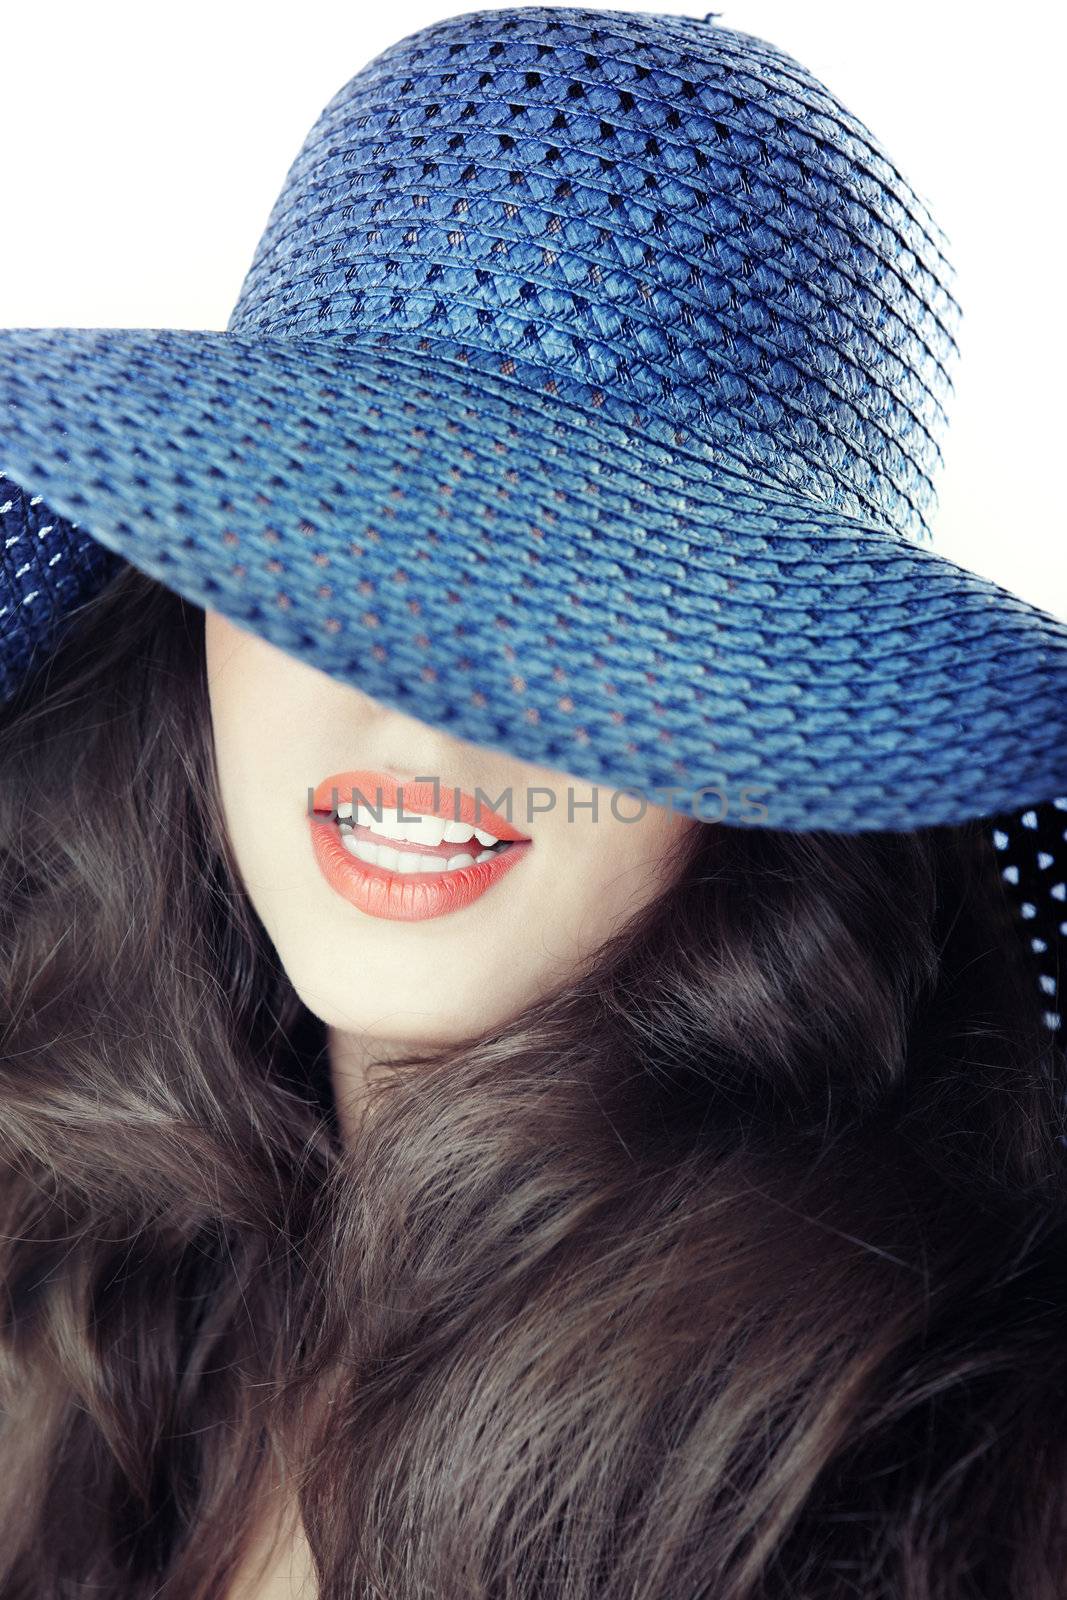 Smiling lady in blue summer hat. Studio photo